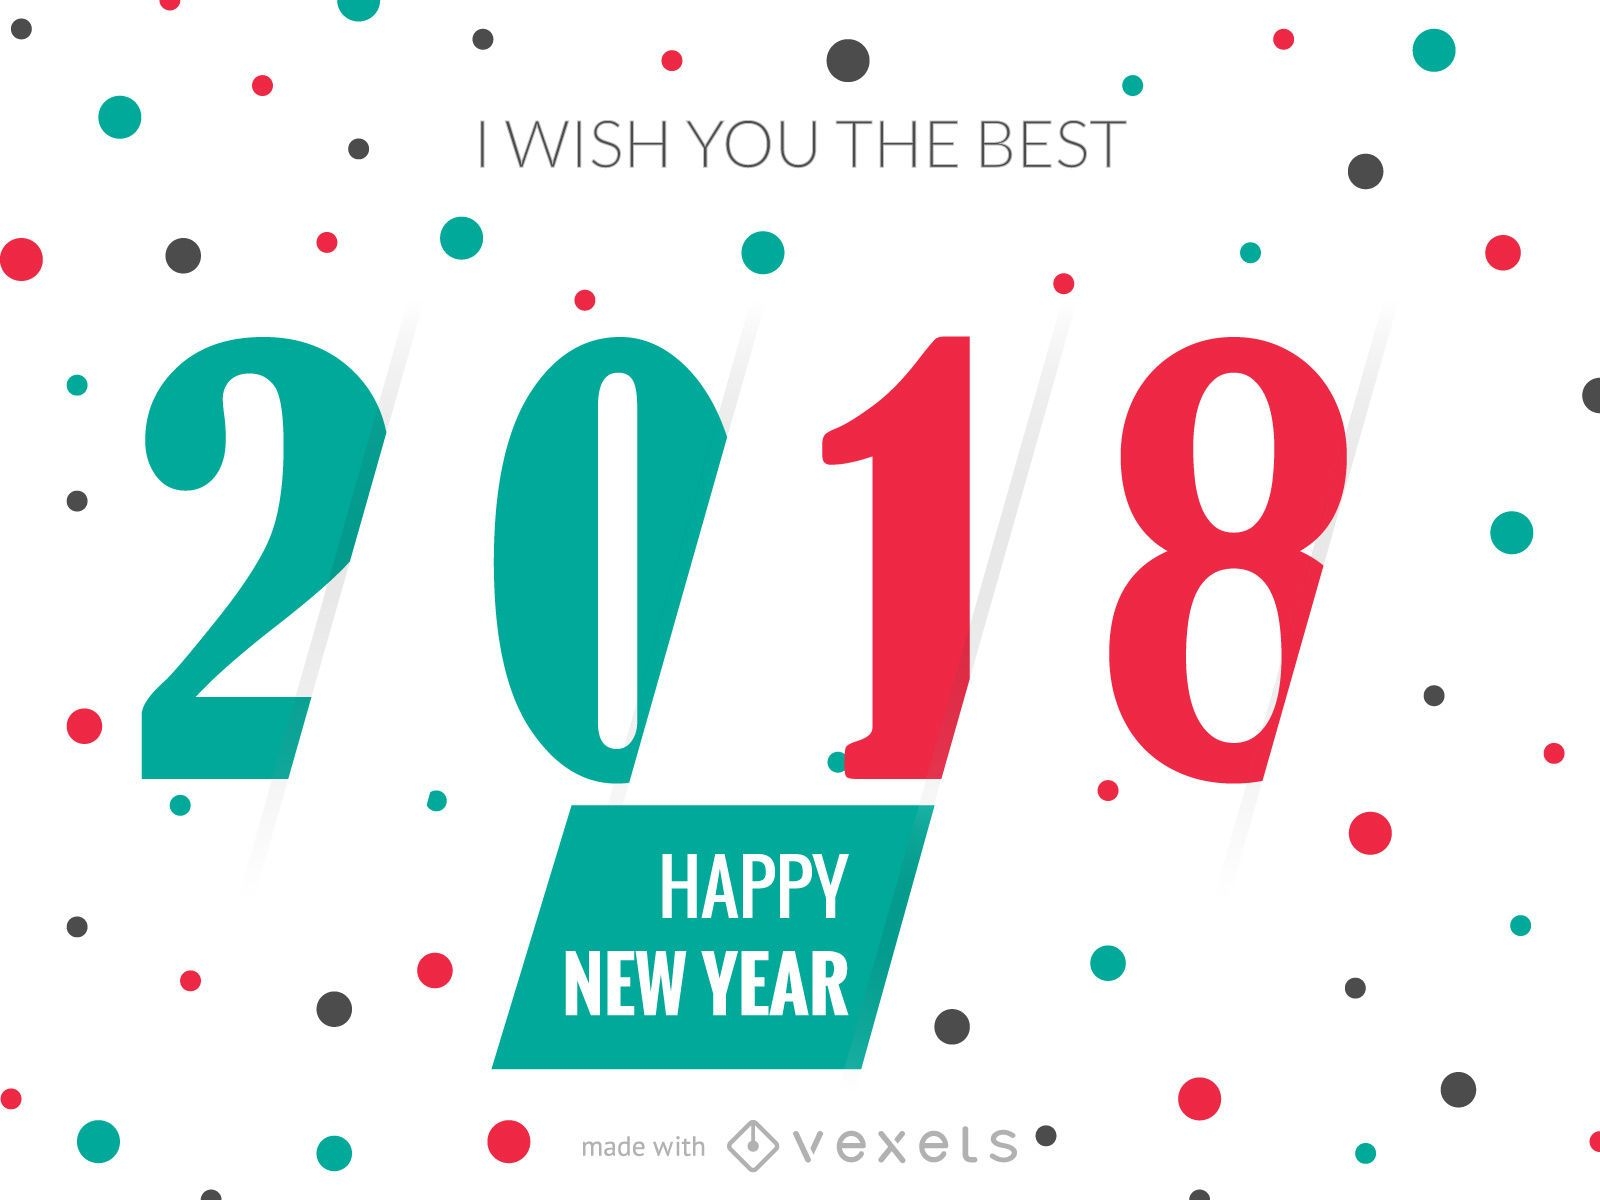 2018 New Year greeting card maker